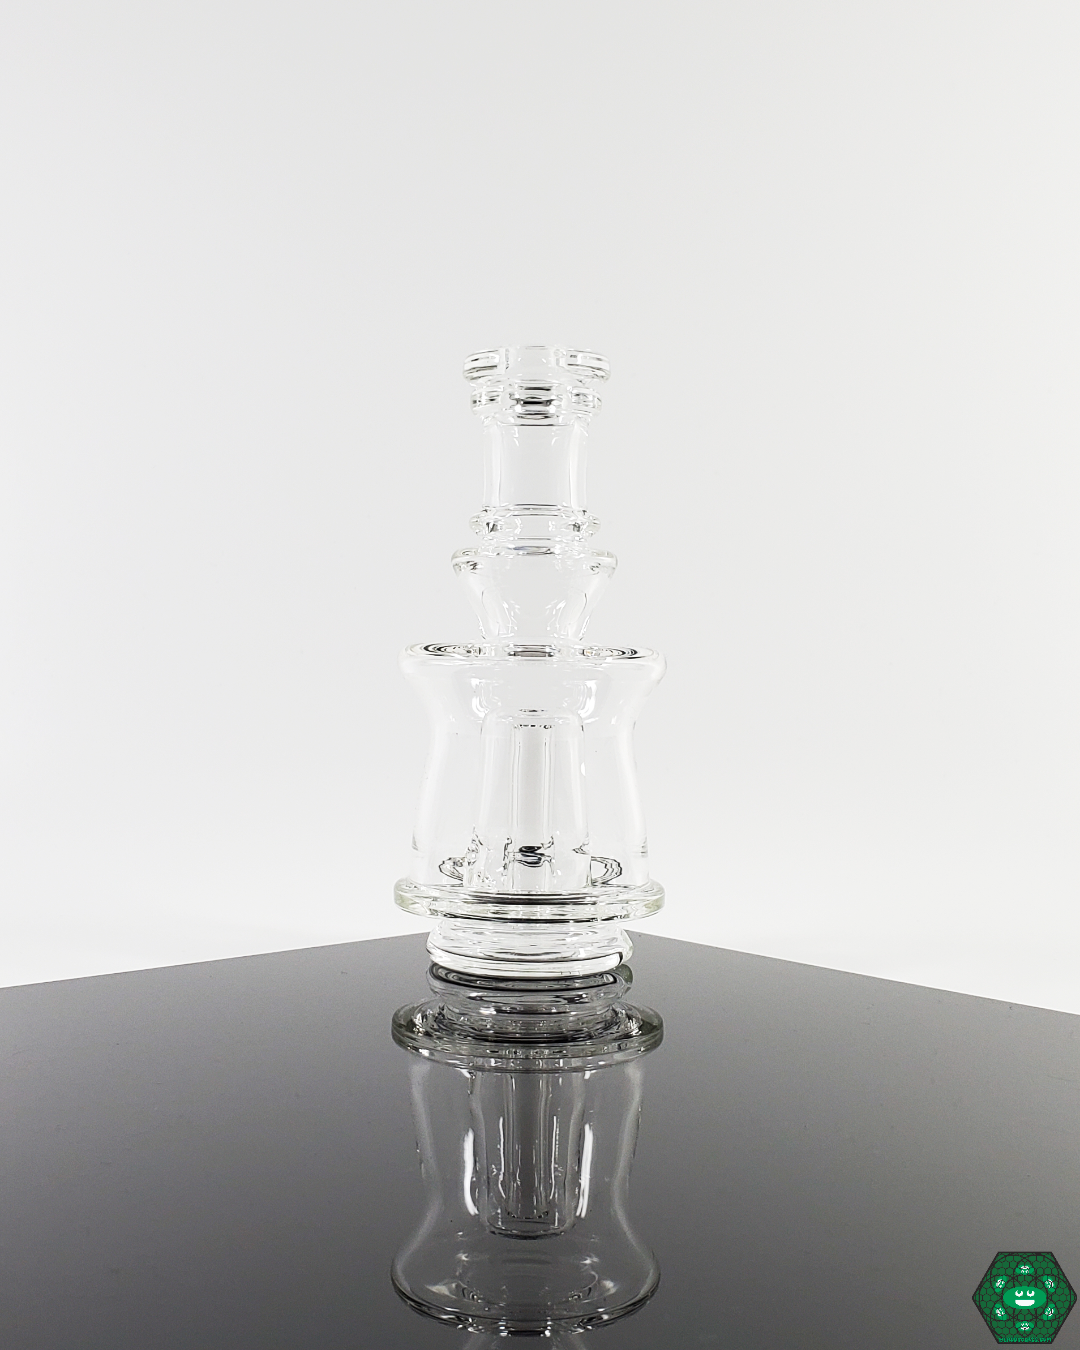 Ery Glass - Puffco Peak Glass Attachment - Double Uptake Recycler